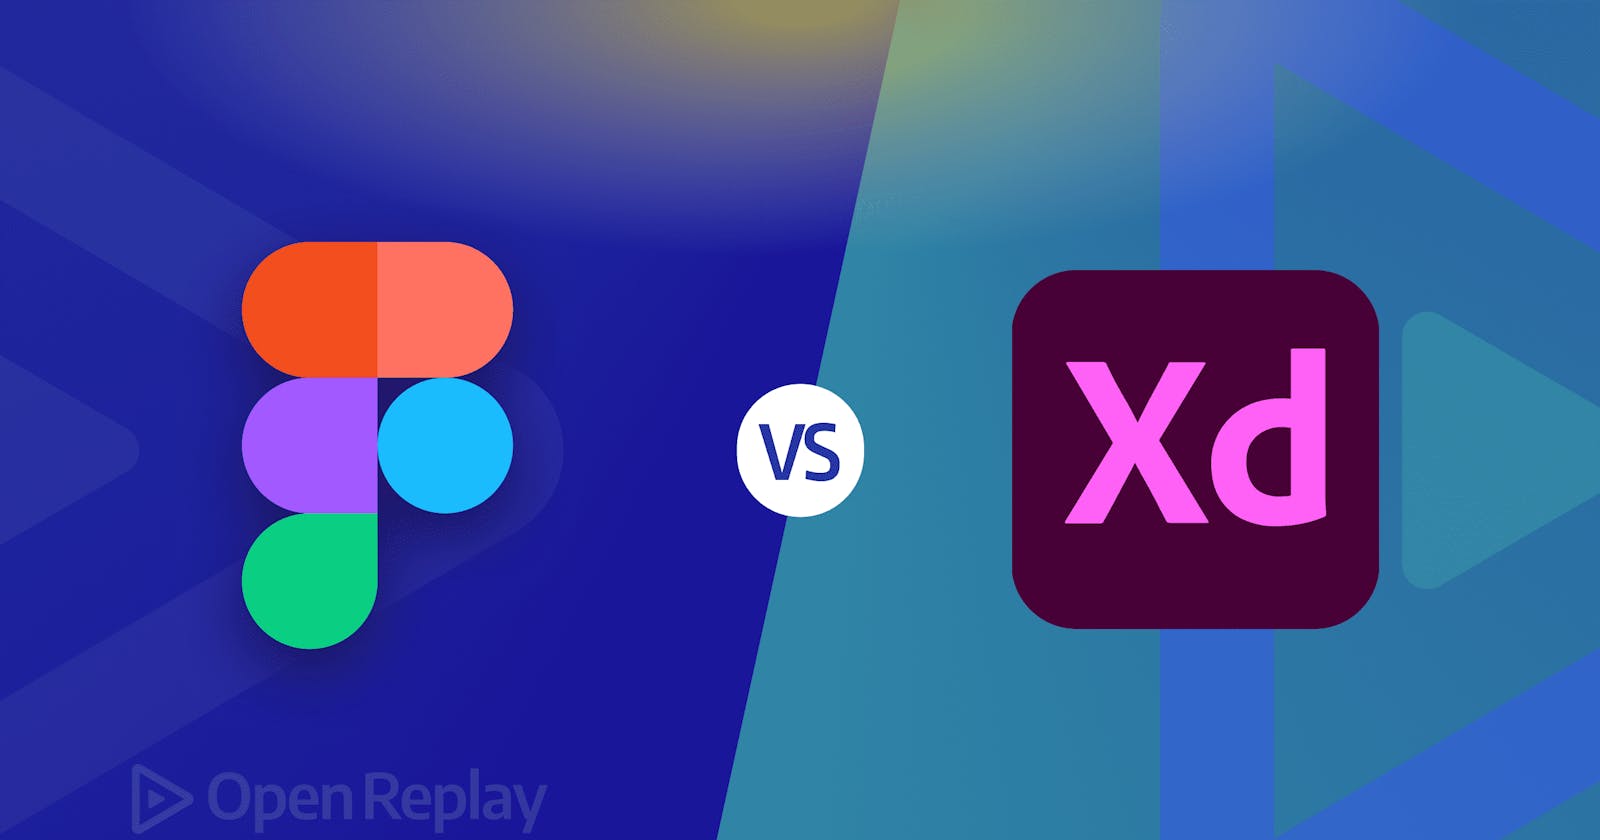 Figma vs. Adobe XD -- which is the better design tool?